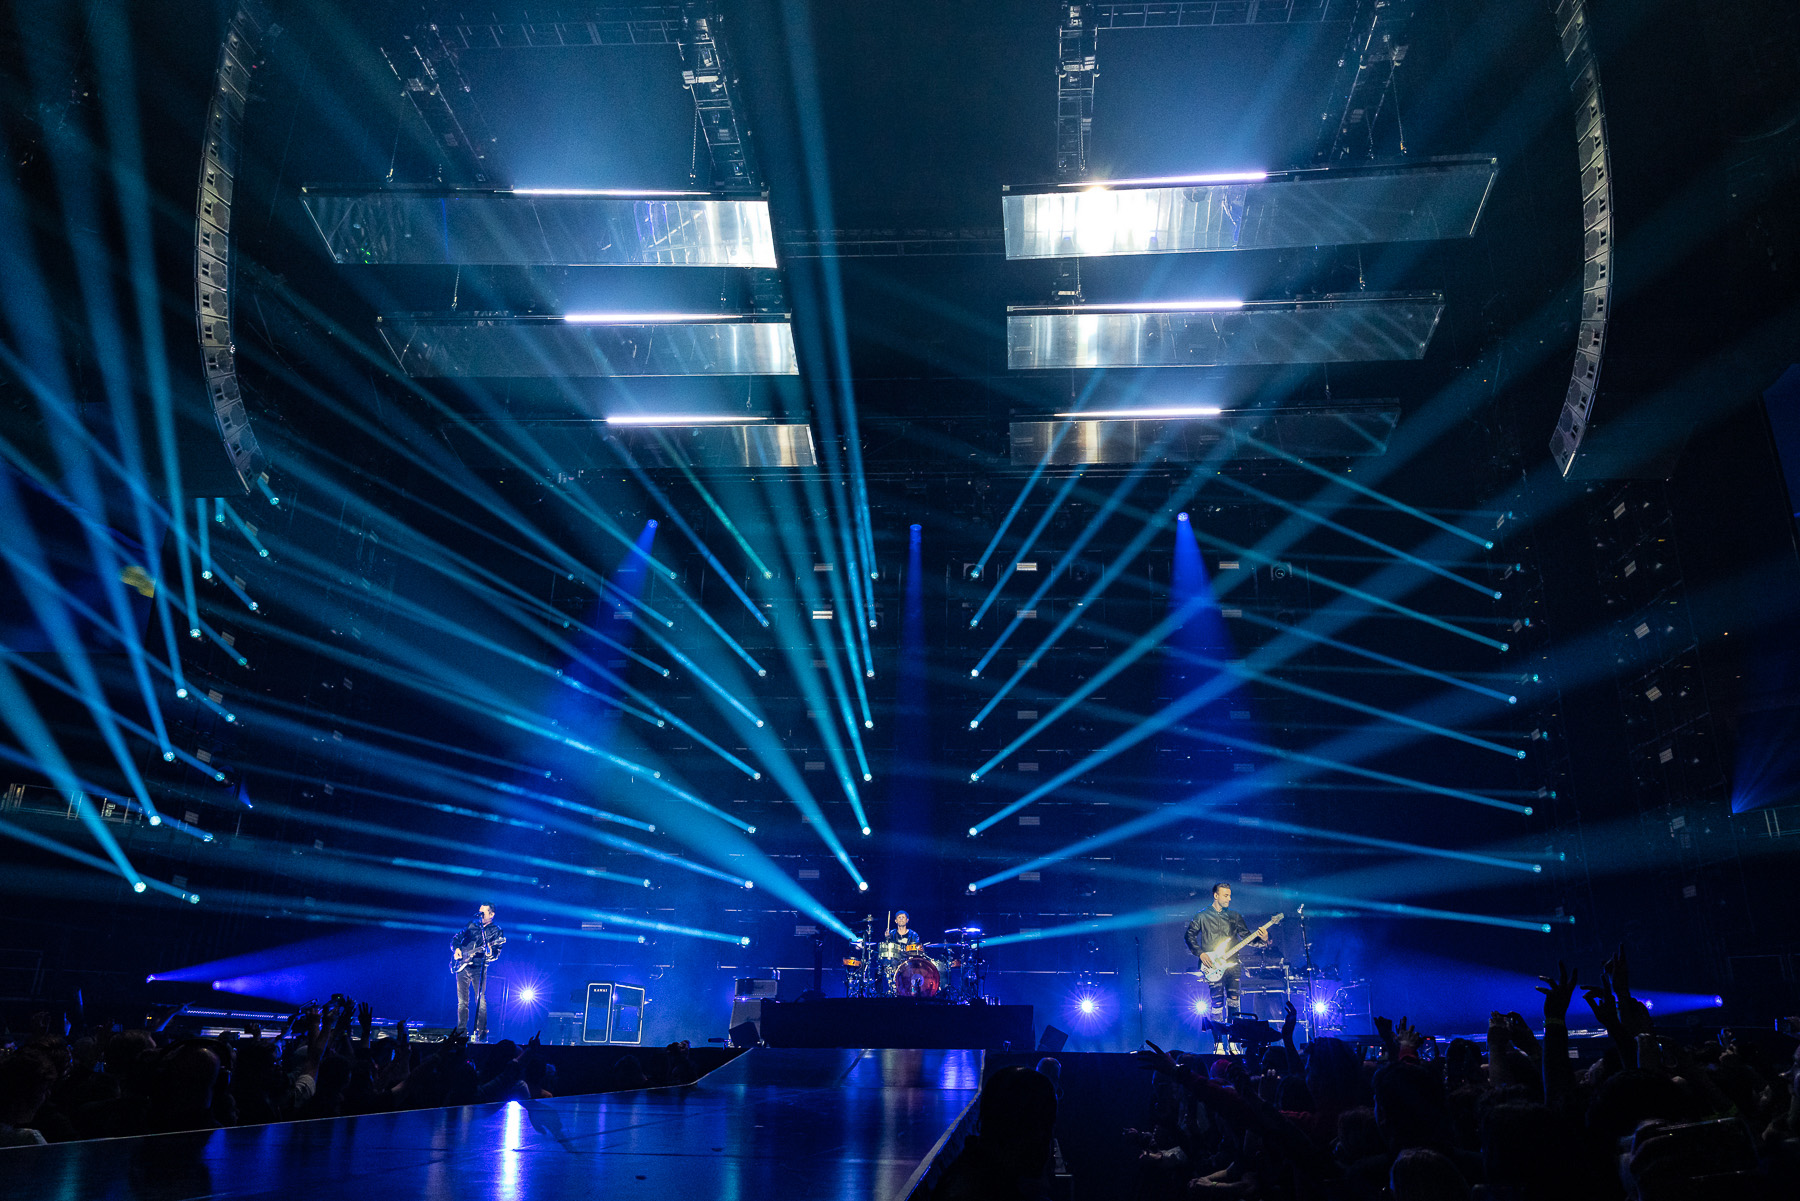 Jesse Lee Stout and Sooner Routhier Reflect Mood of Muse Tour With CHAUVET Professional